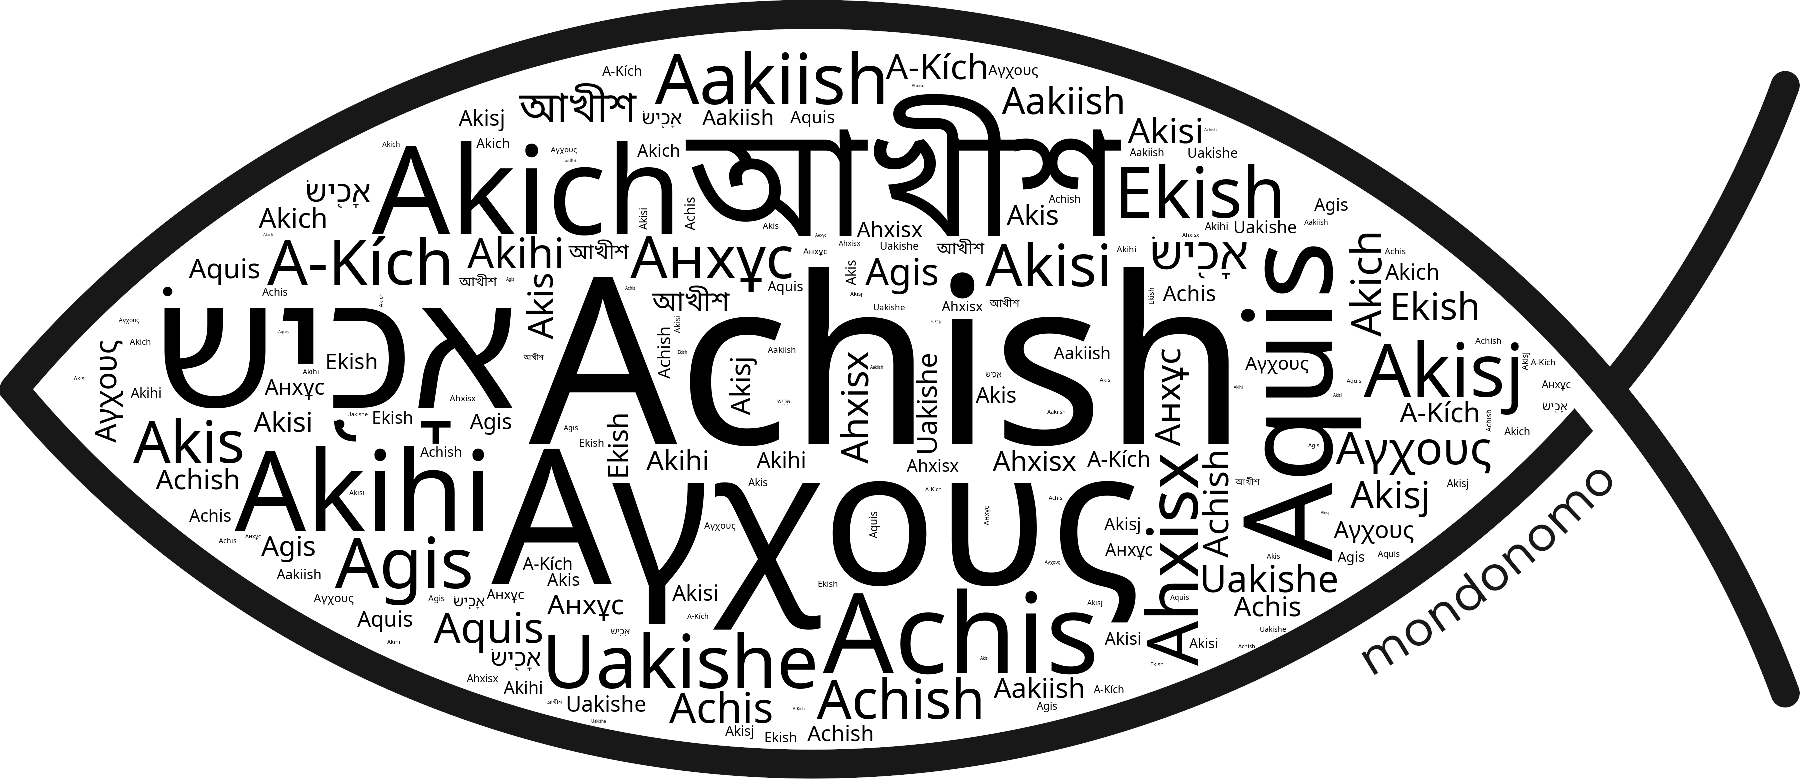 Name Achish in the world's Bibles